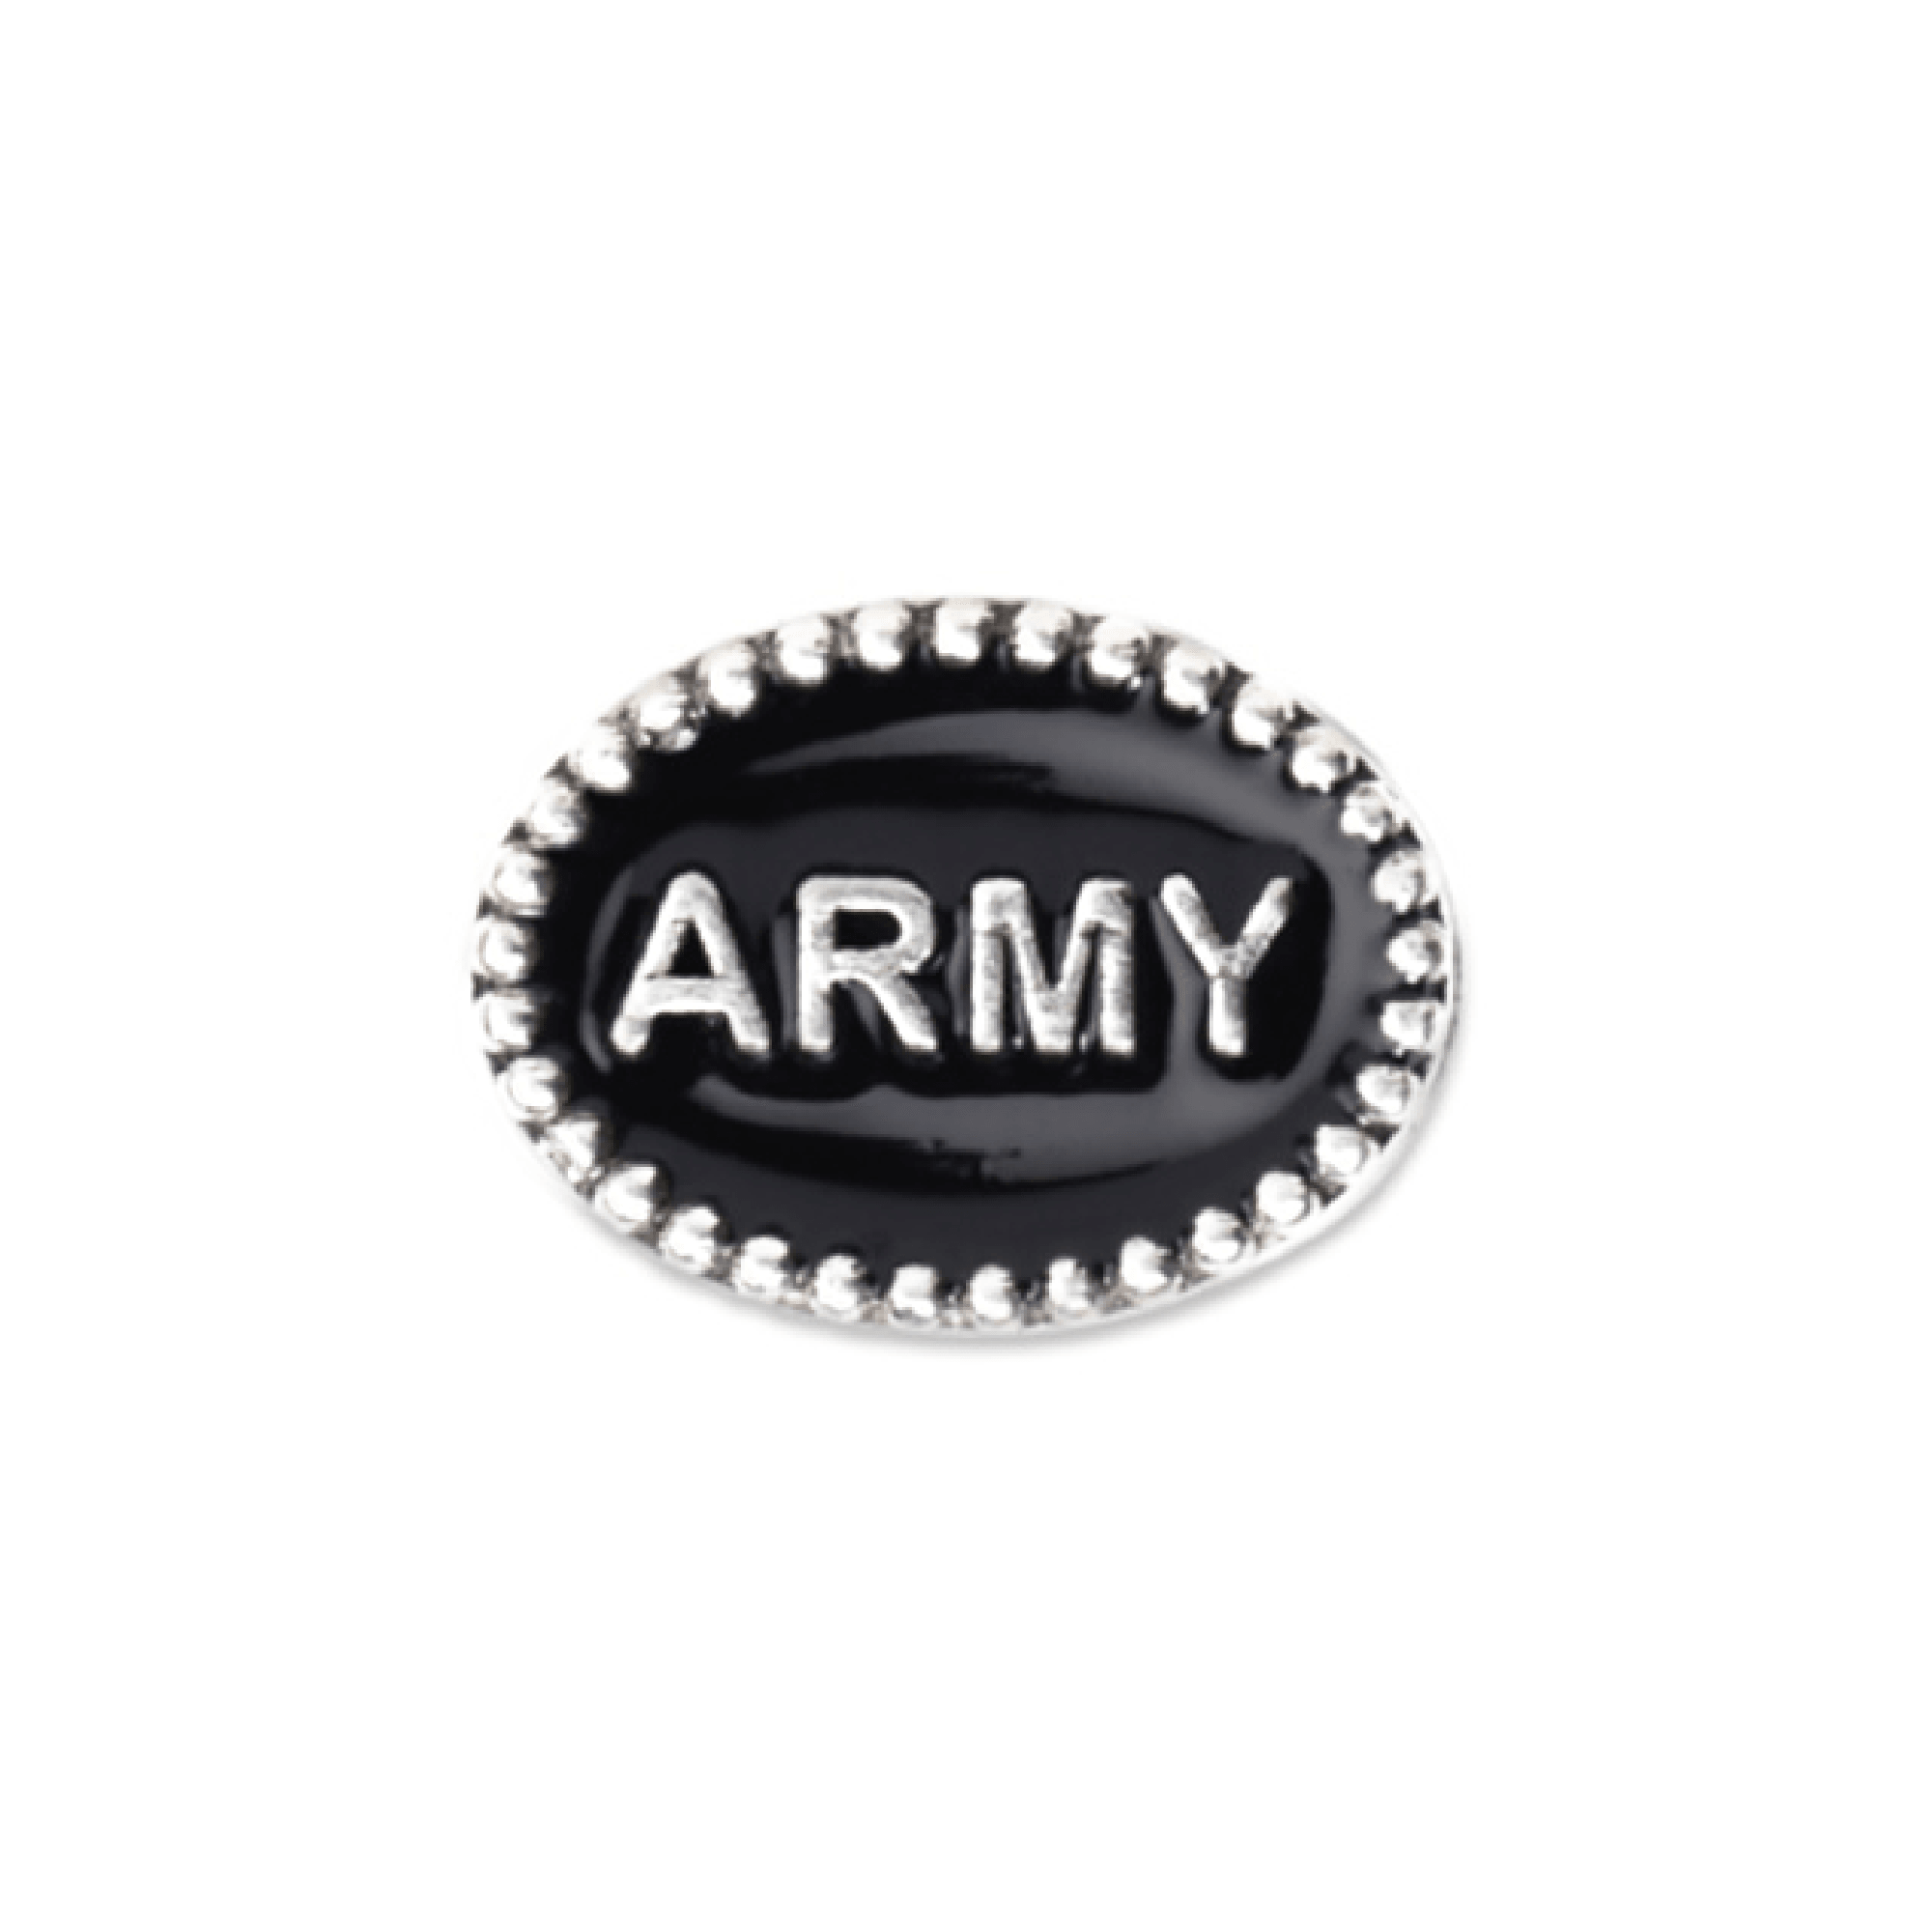 Military Jewelry, Military Charms, United States Army, Military Gifts, Army Spacer Army Gift Army Jewelry